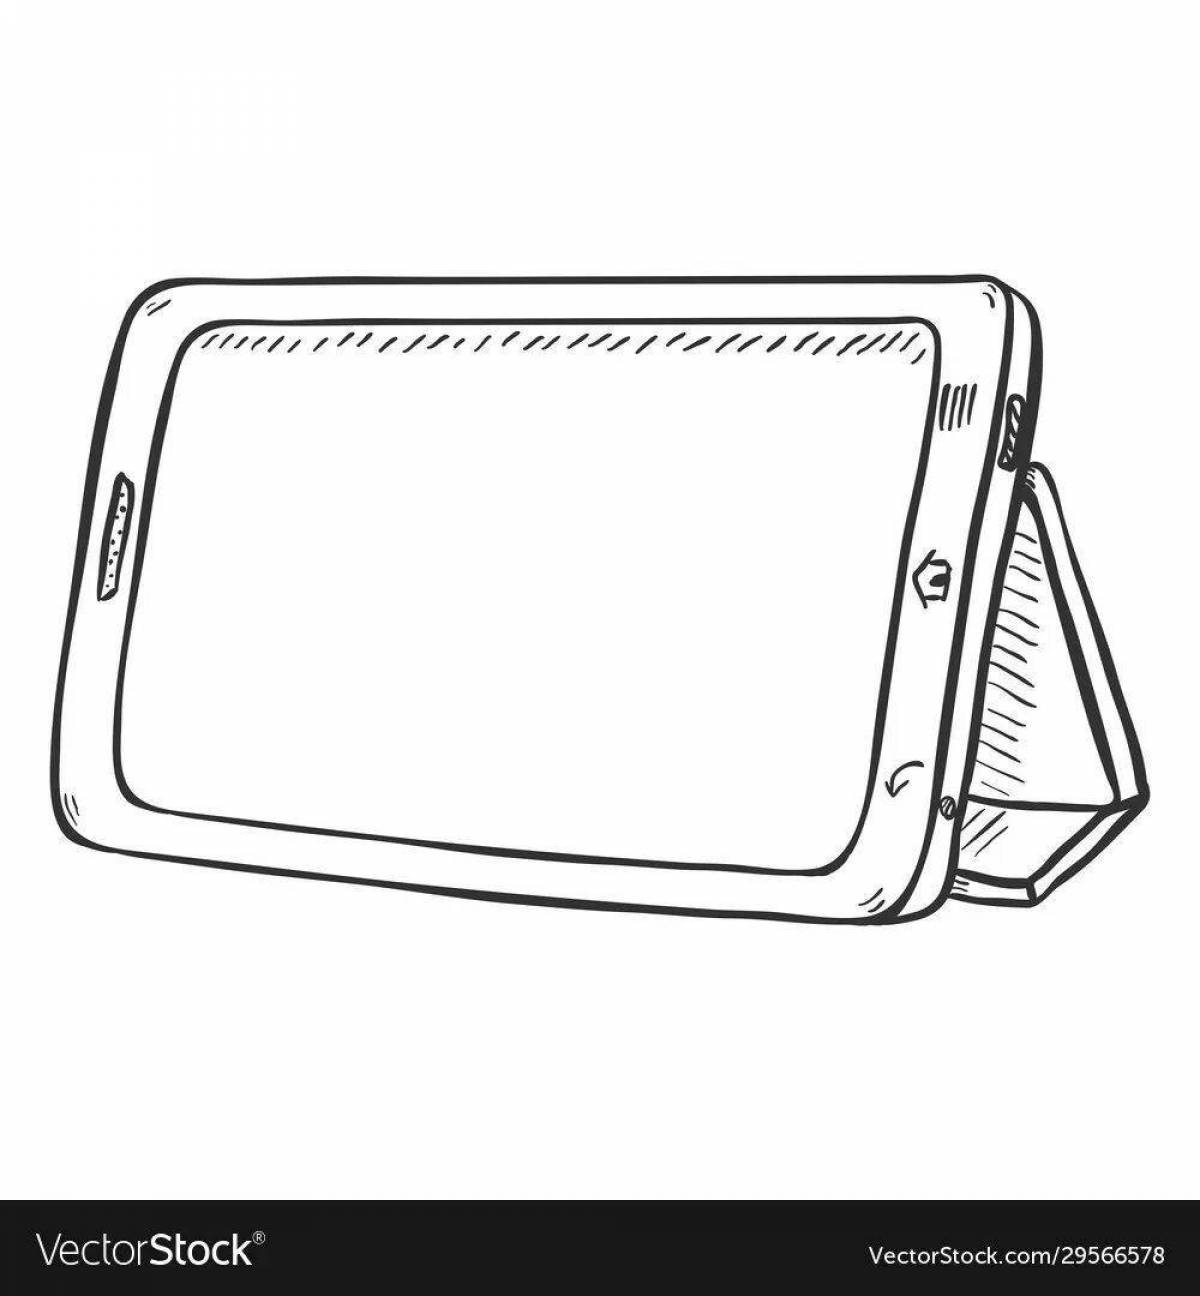 Attractive ipad coloring book with stylus